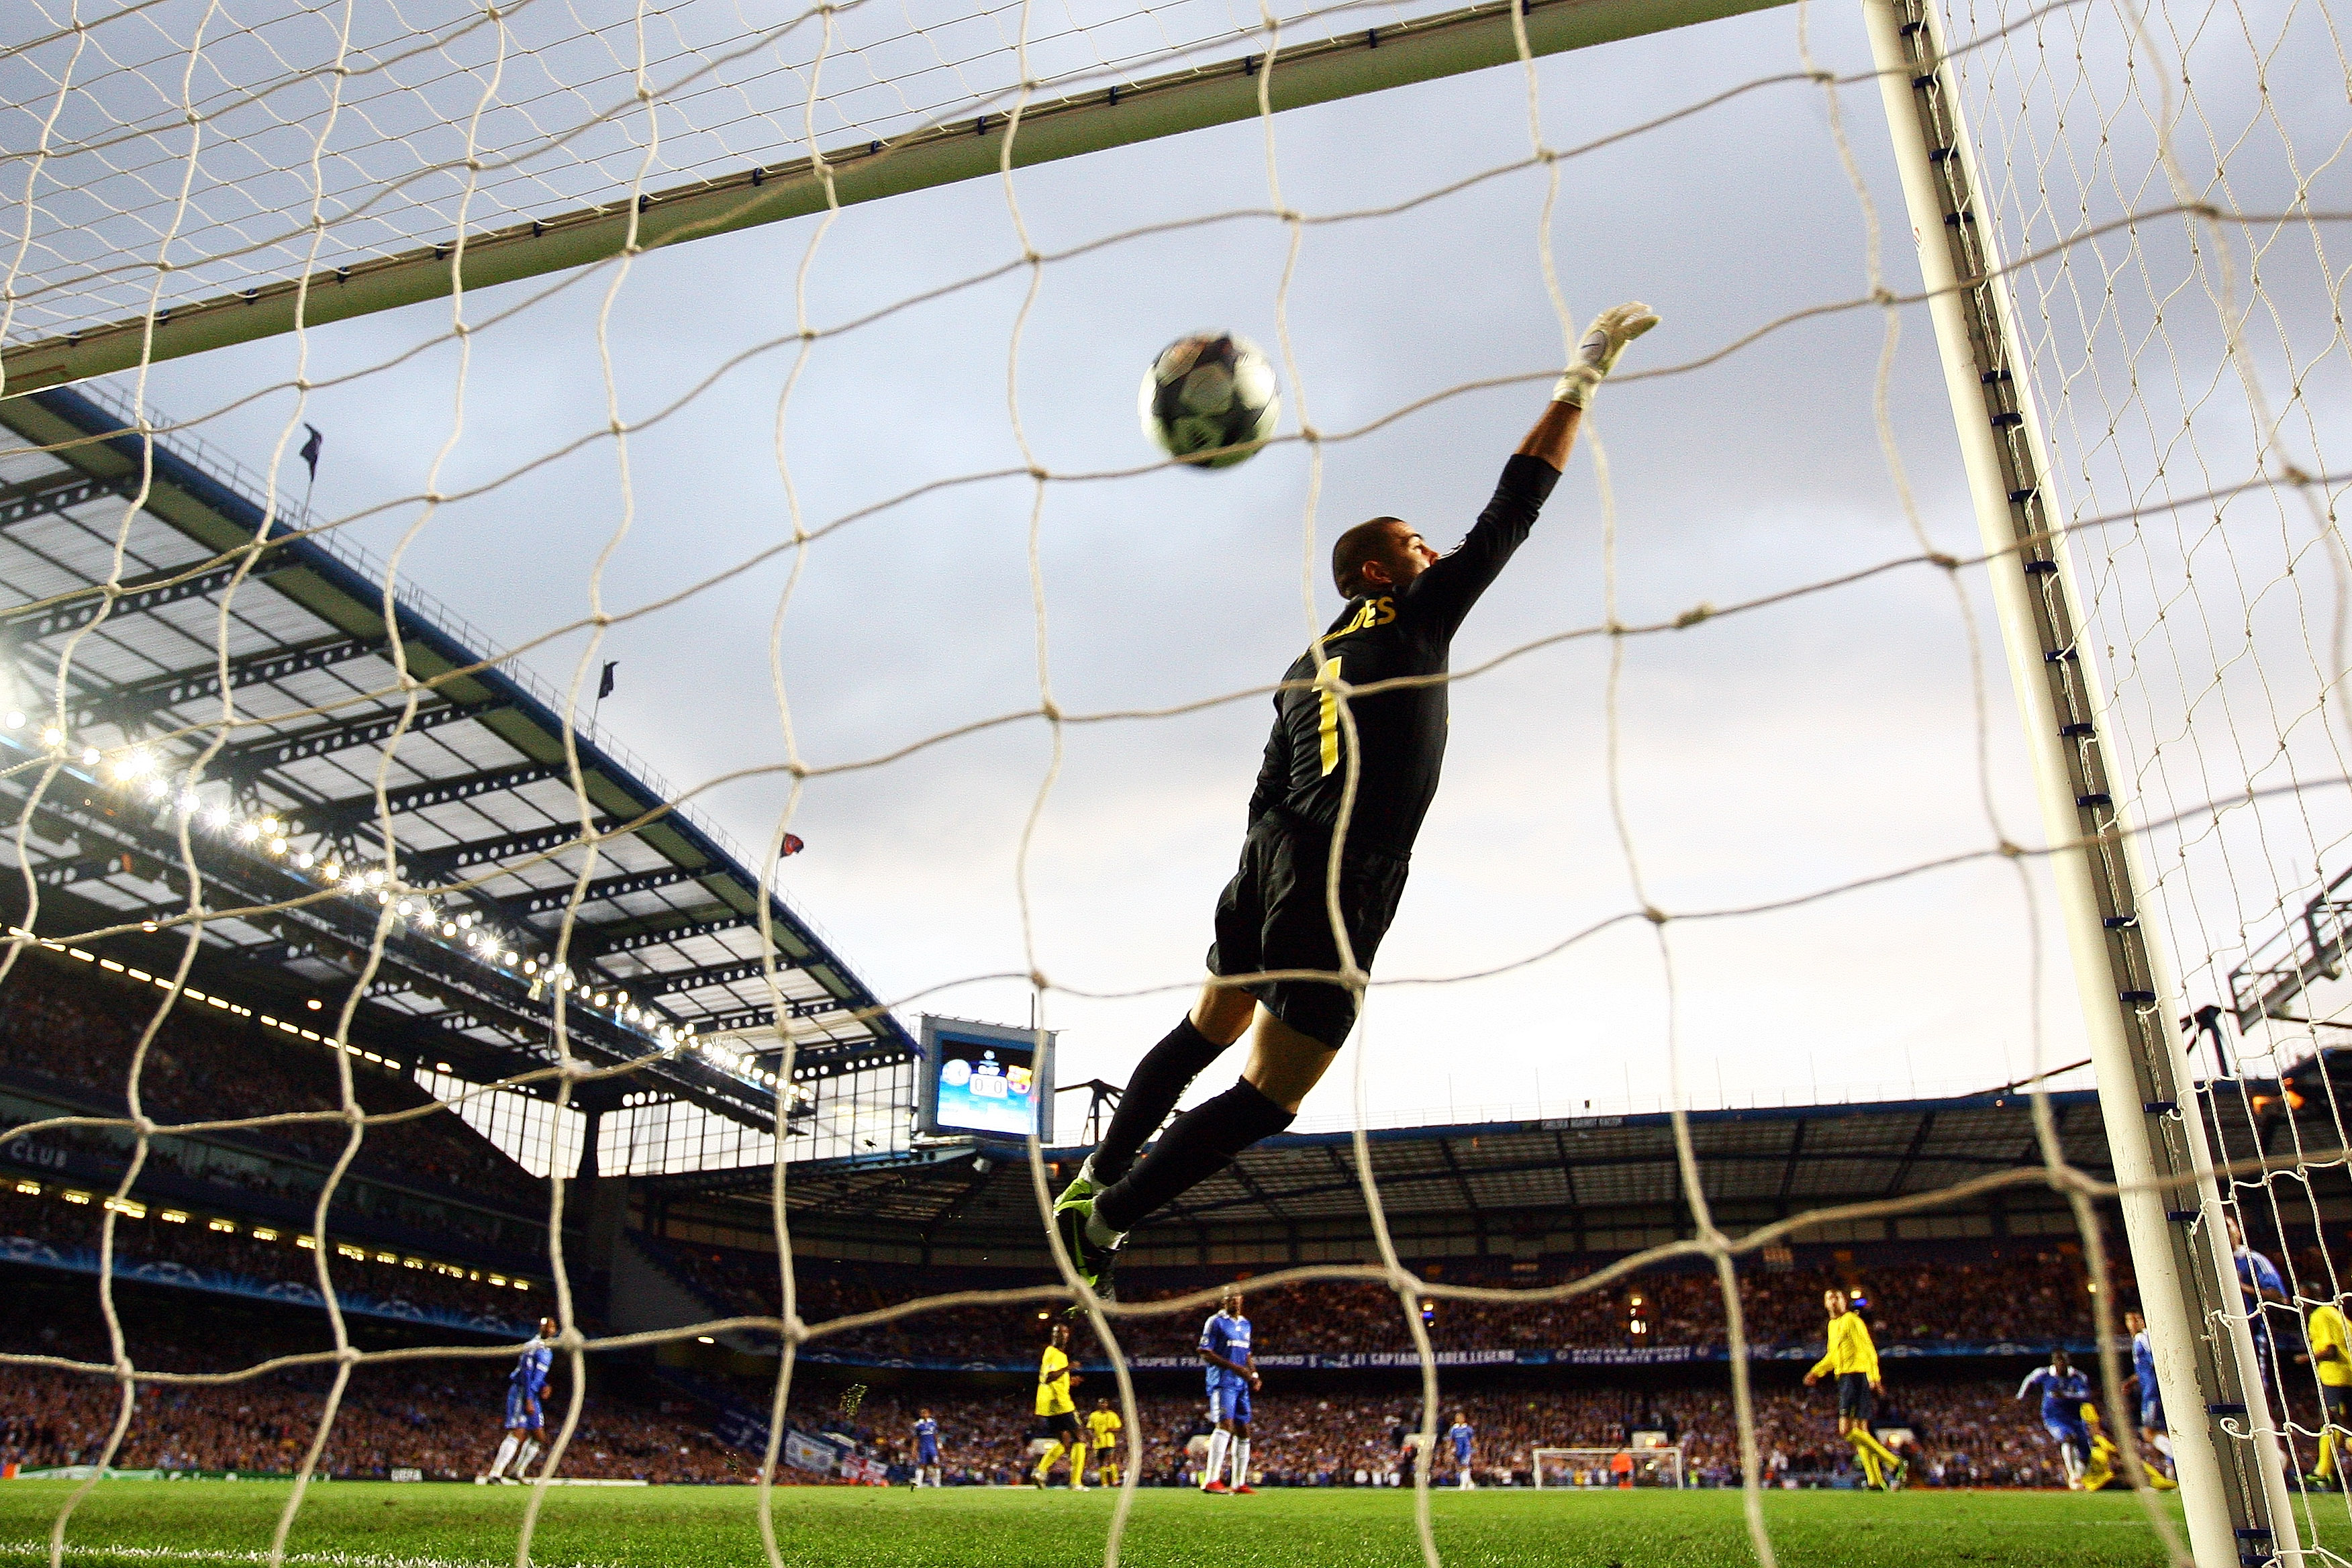 LONDON, ENGLAND - MAY 06:  Victor Valdes of Barcelona dives but can not stop the shot from Michael Essien of Chelsea scoring the first goal of the game during the UEFA Champions League Semi Final Second Leg match between Chelsea and Barcelona at Stamford